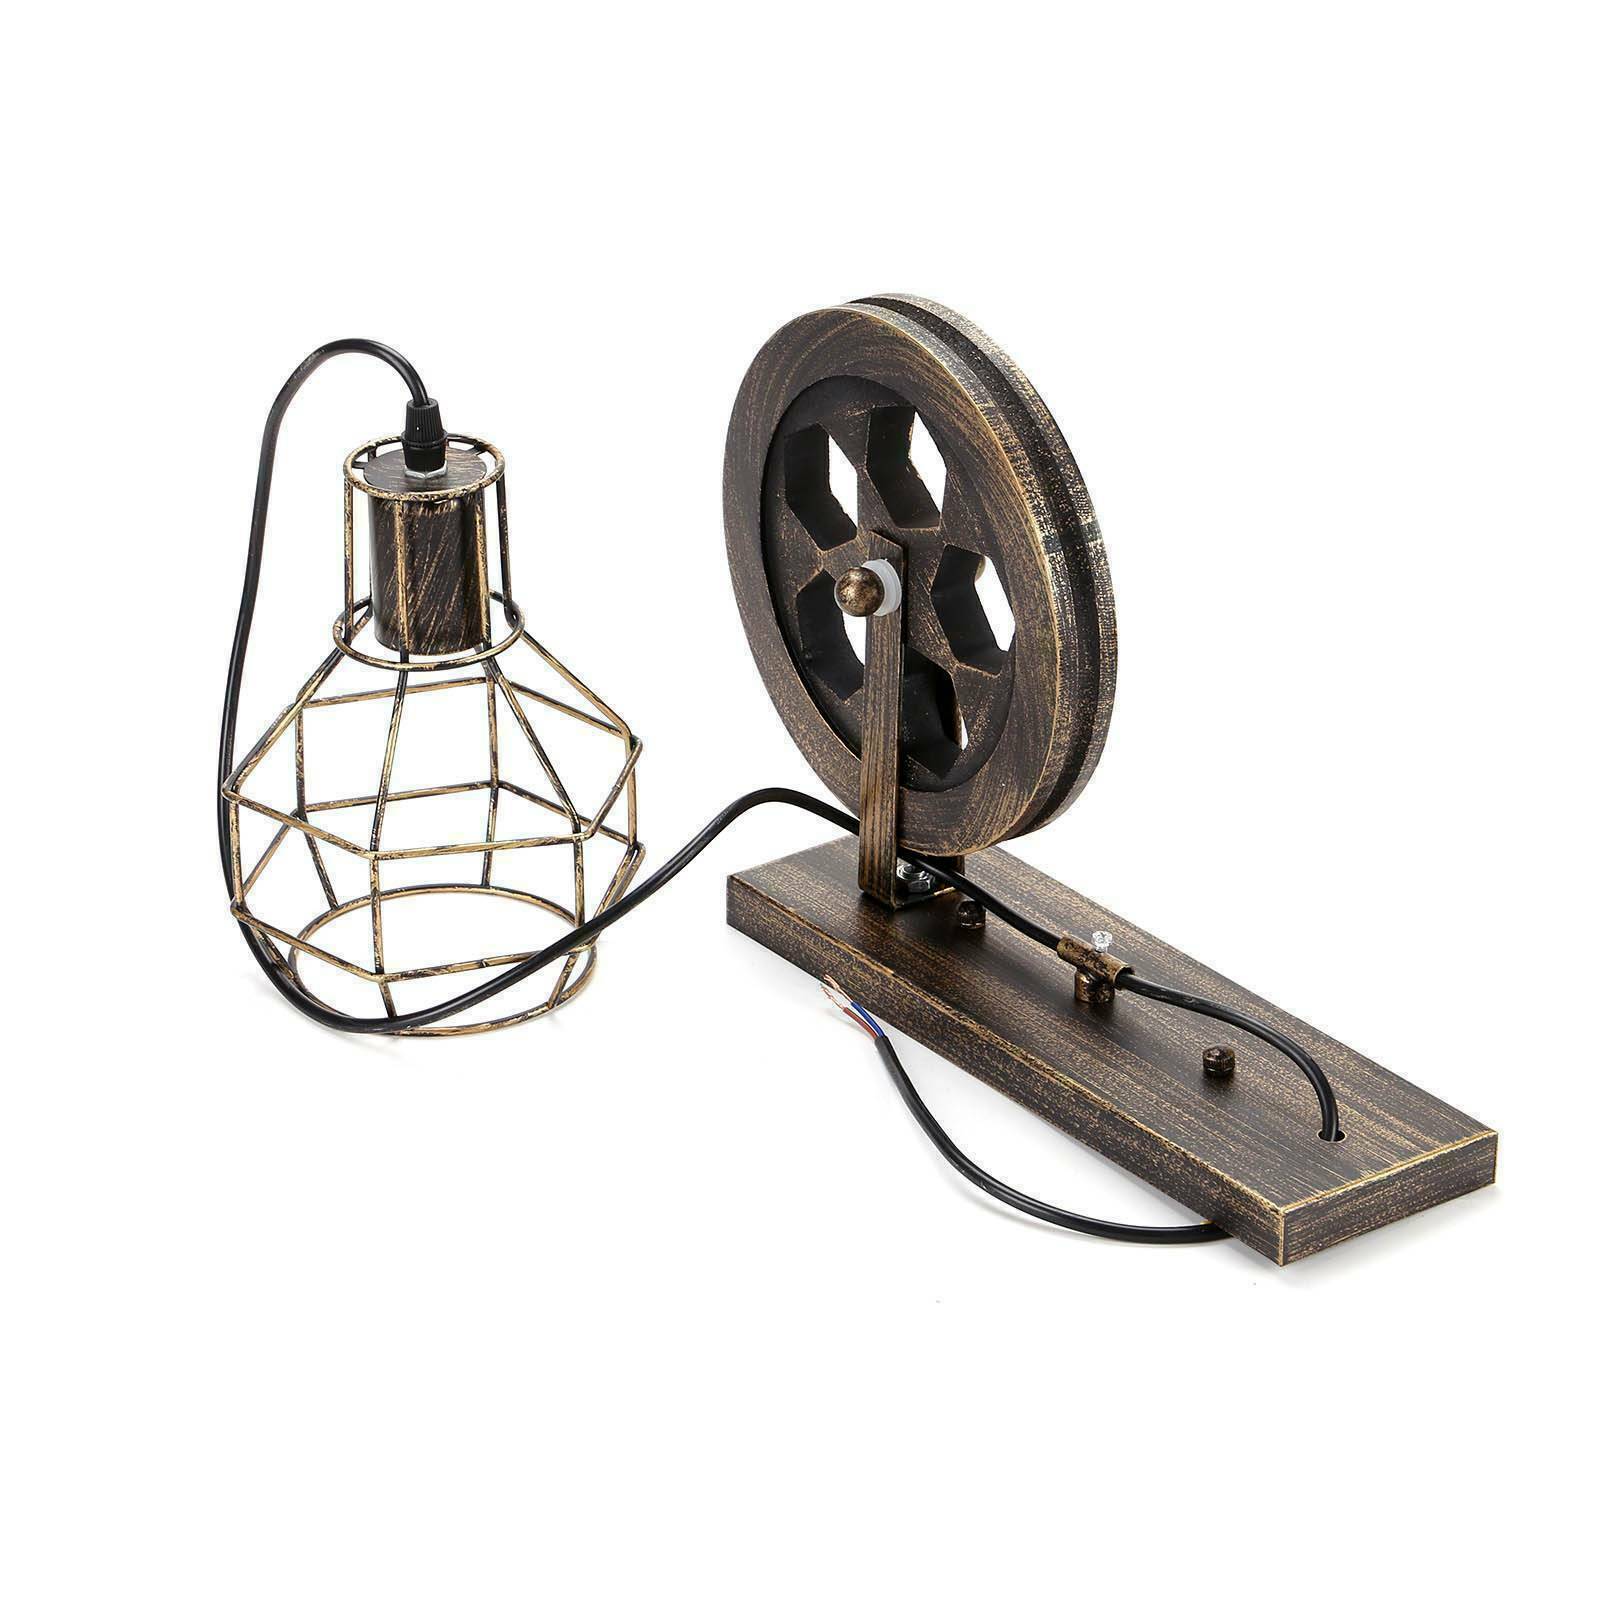 Rustic Retro Wall Lamp with Wheel Design - Vintage Industrial Lighting, E27 Lamp Holder